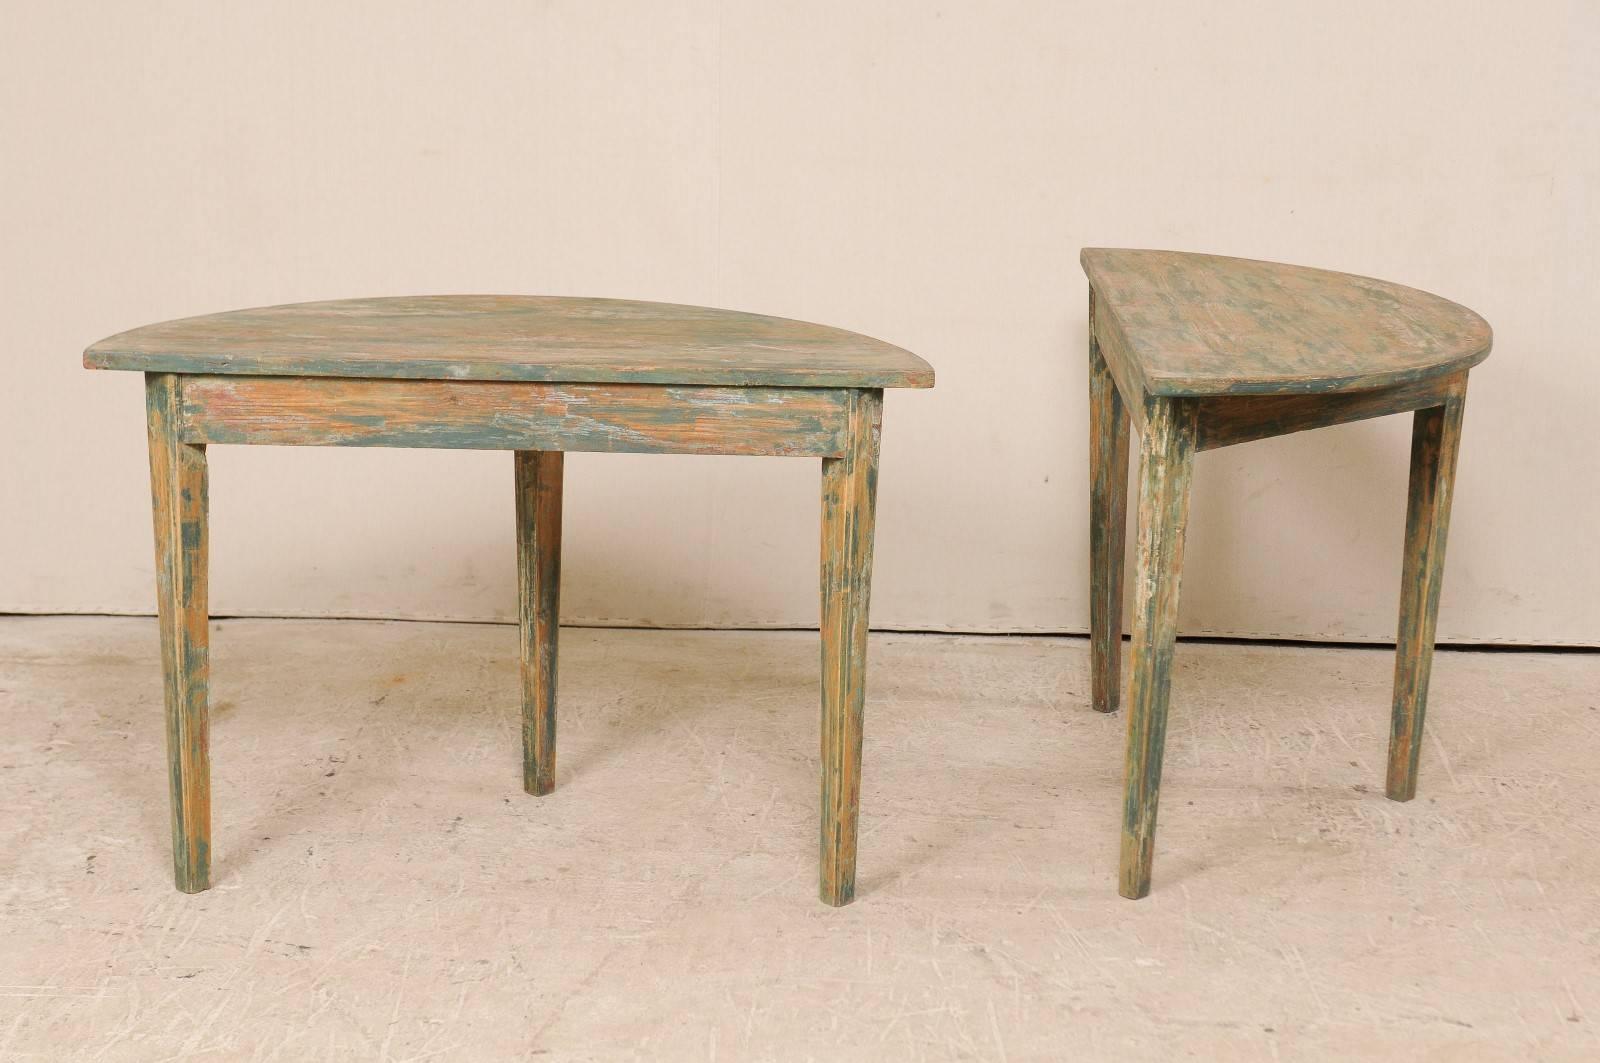 Pair of Painted Wood Swedish Demilune Tables with Traces of Original Paint 2